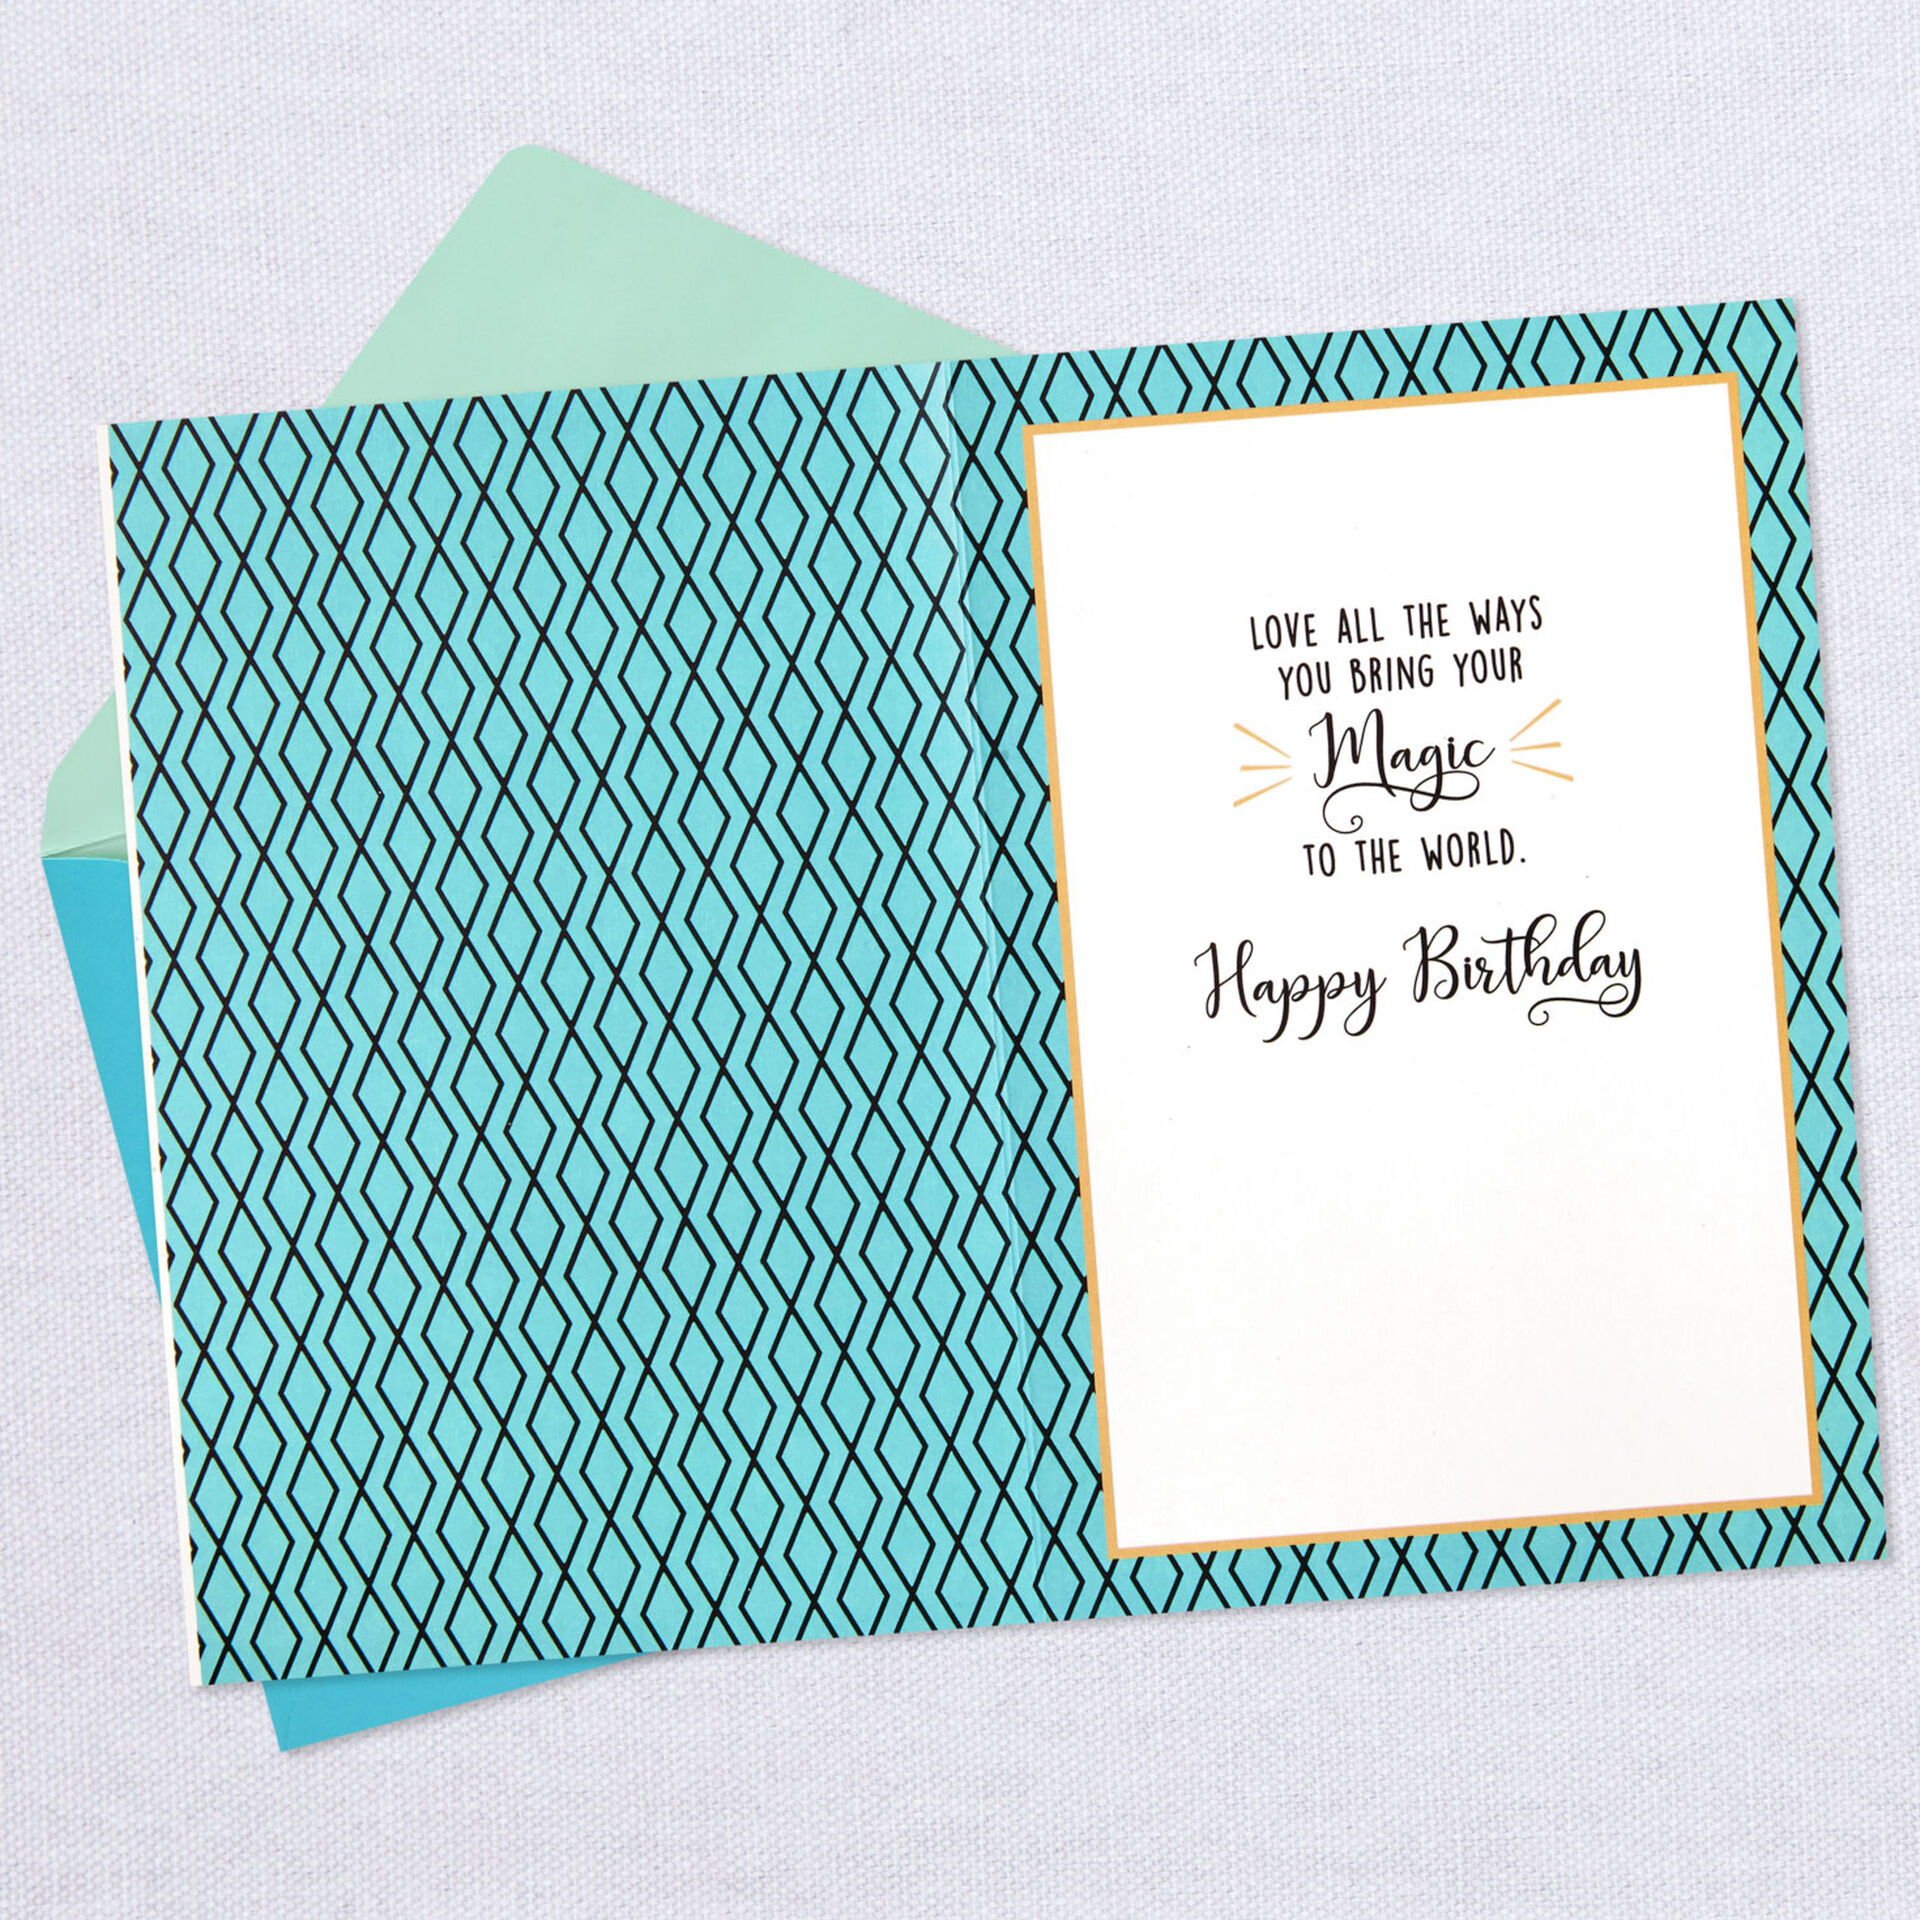 Gold-Sparkling-Crown-&-Stars-Birthday-Card-for-Her_499MHB1856_03